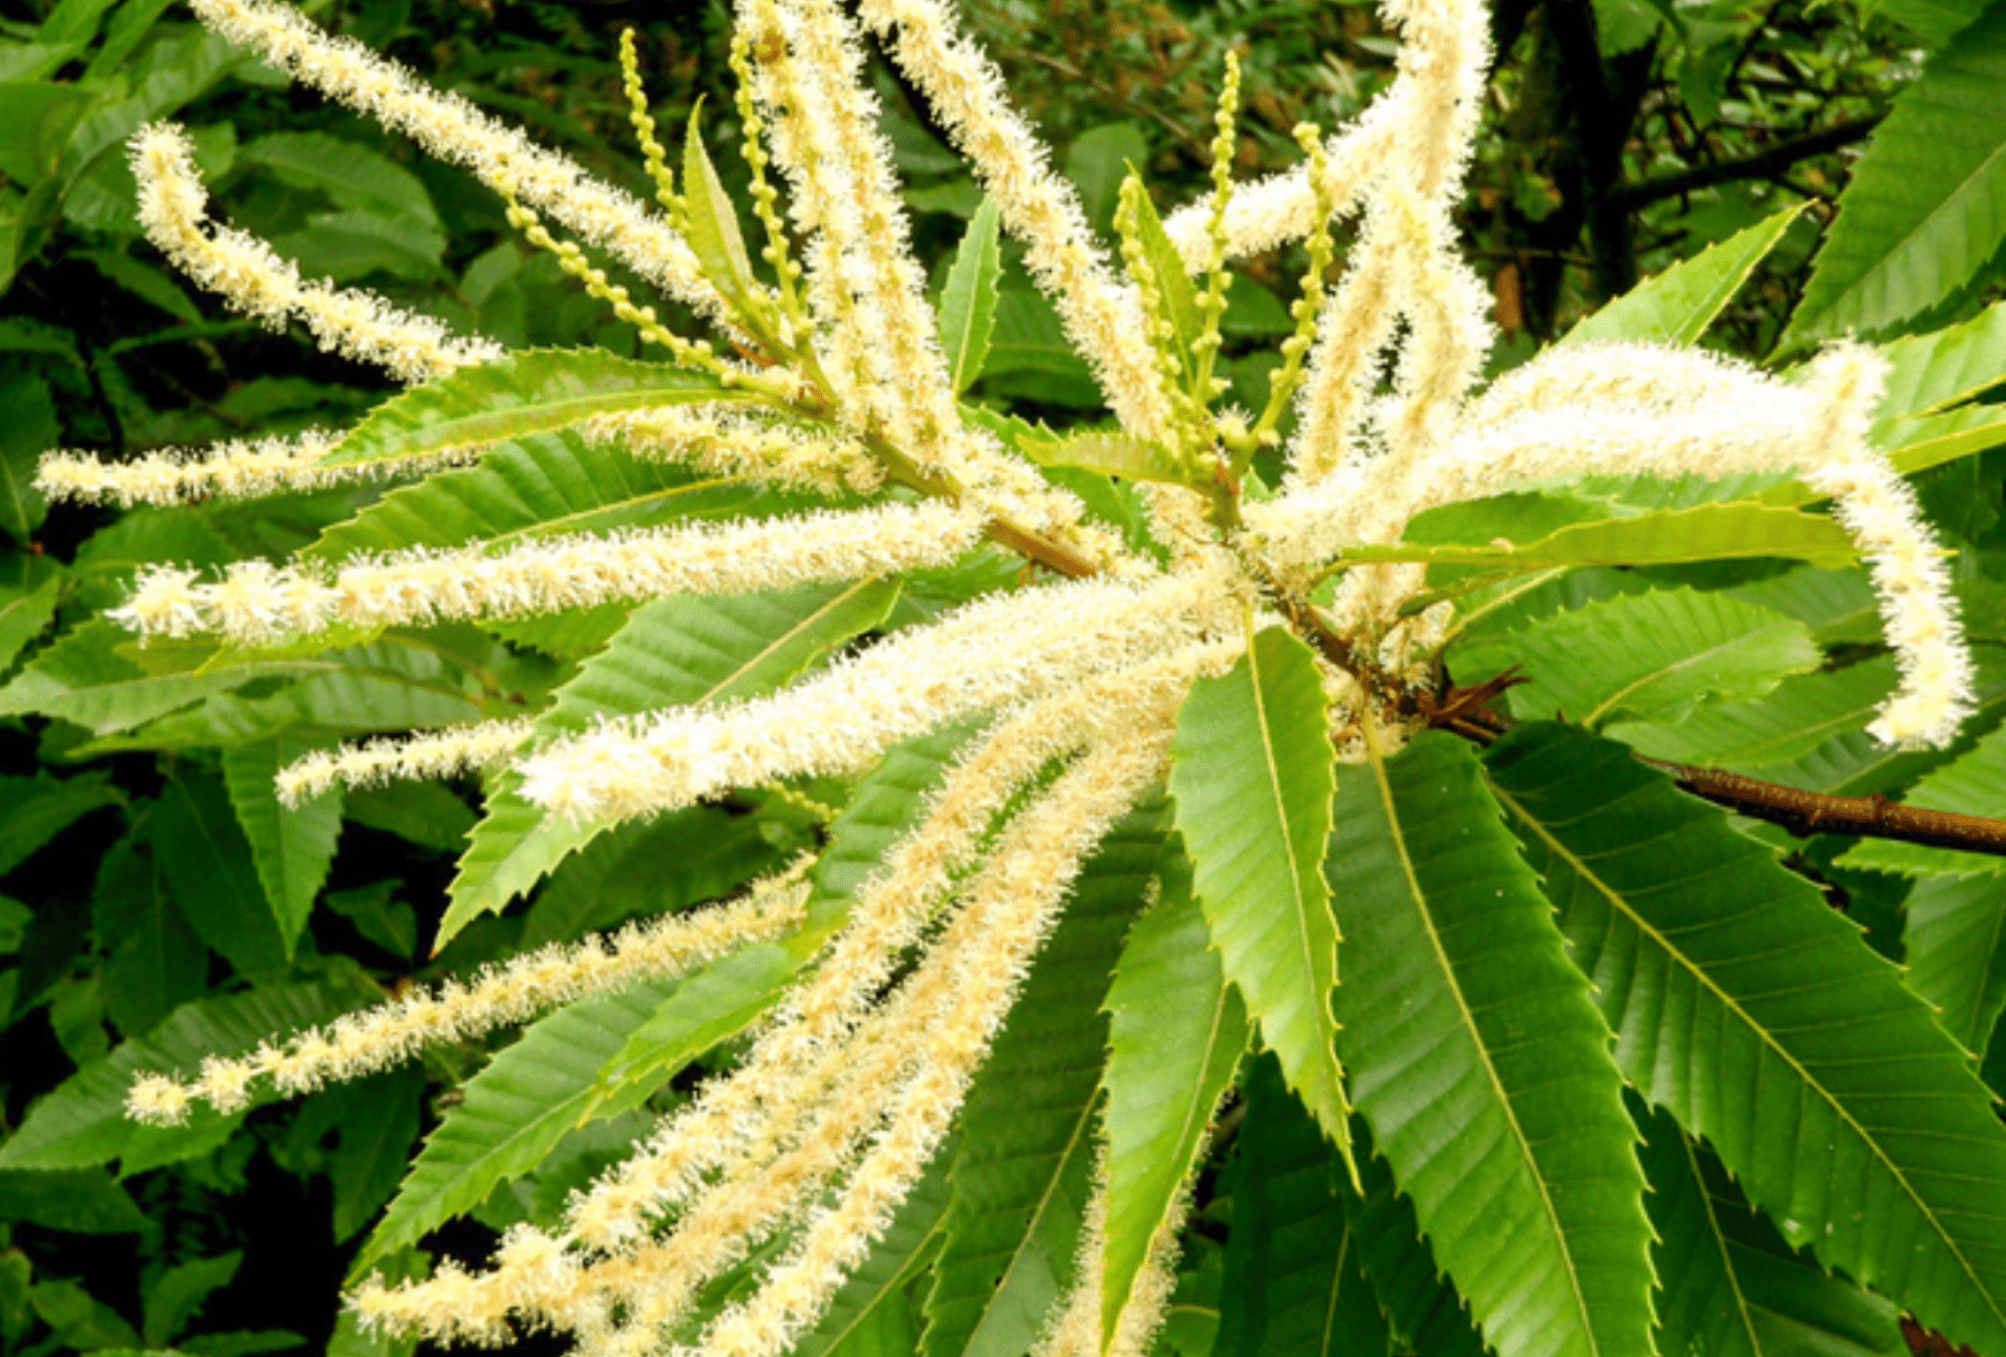 Castanea sativa catkins and leaves